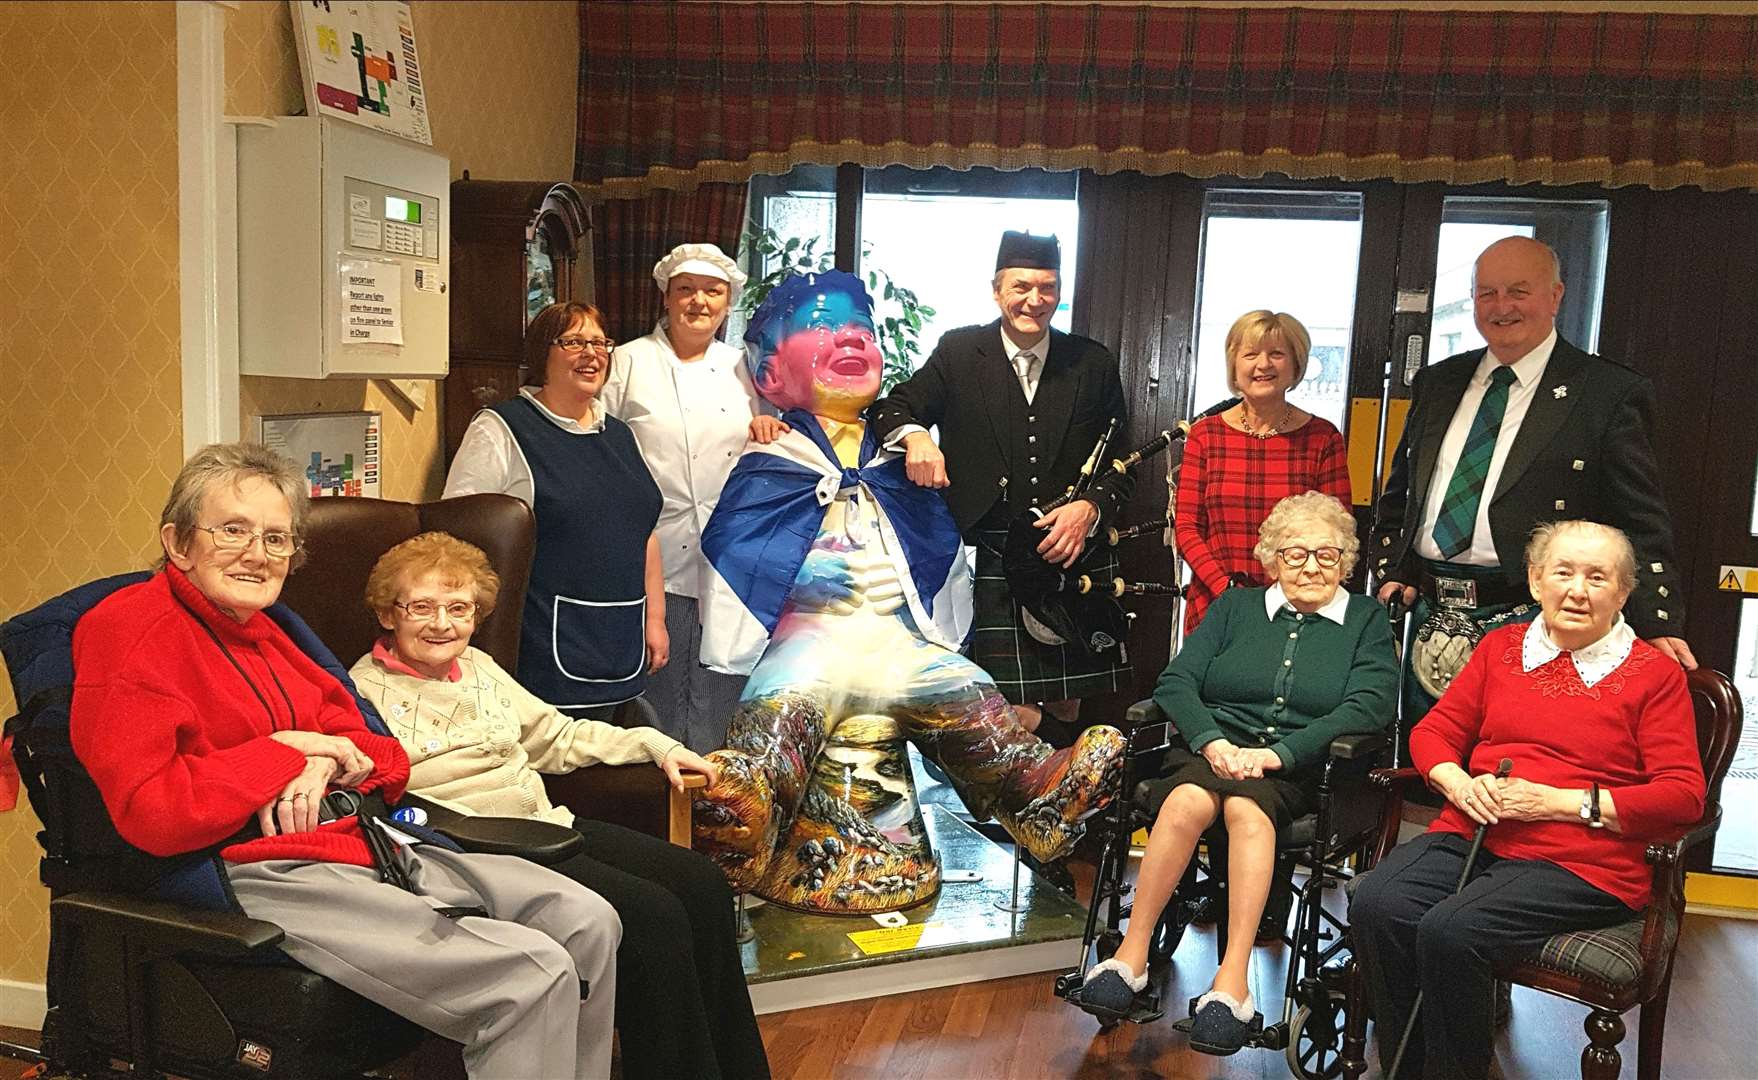 Some of the staff and residents at Pulteney House with Willie Mackay, piper Gordon Tait and Willie's wife Glynis.